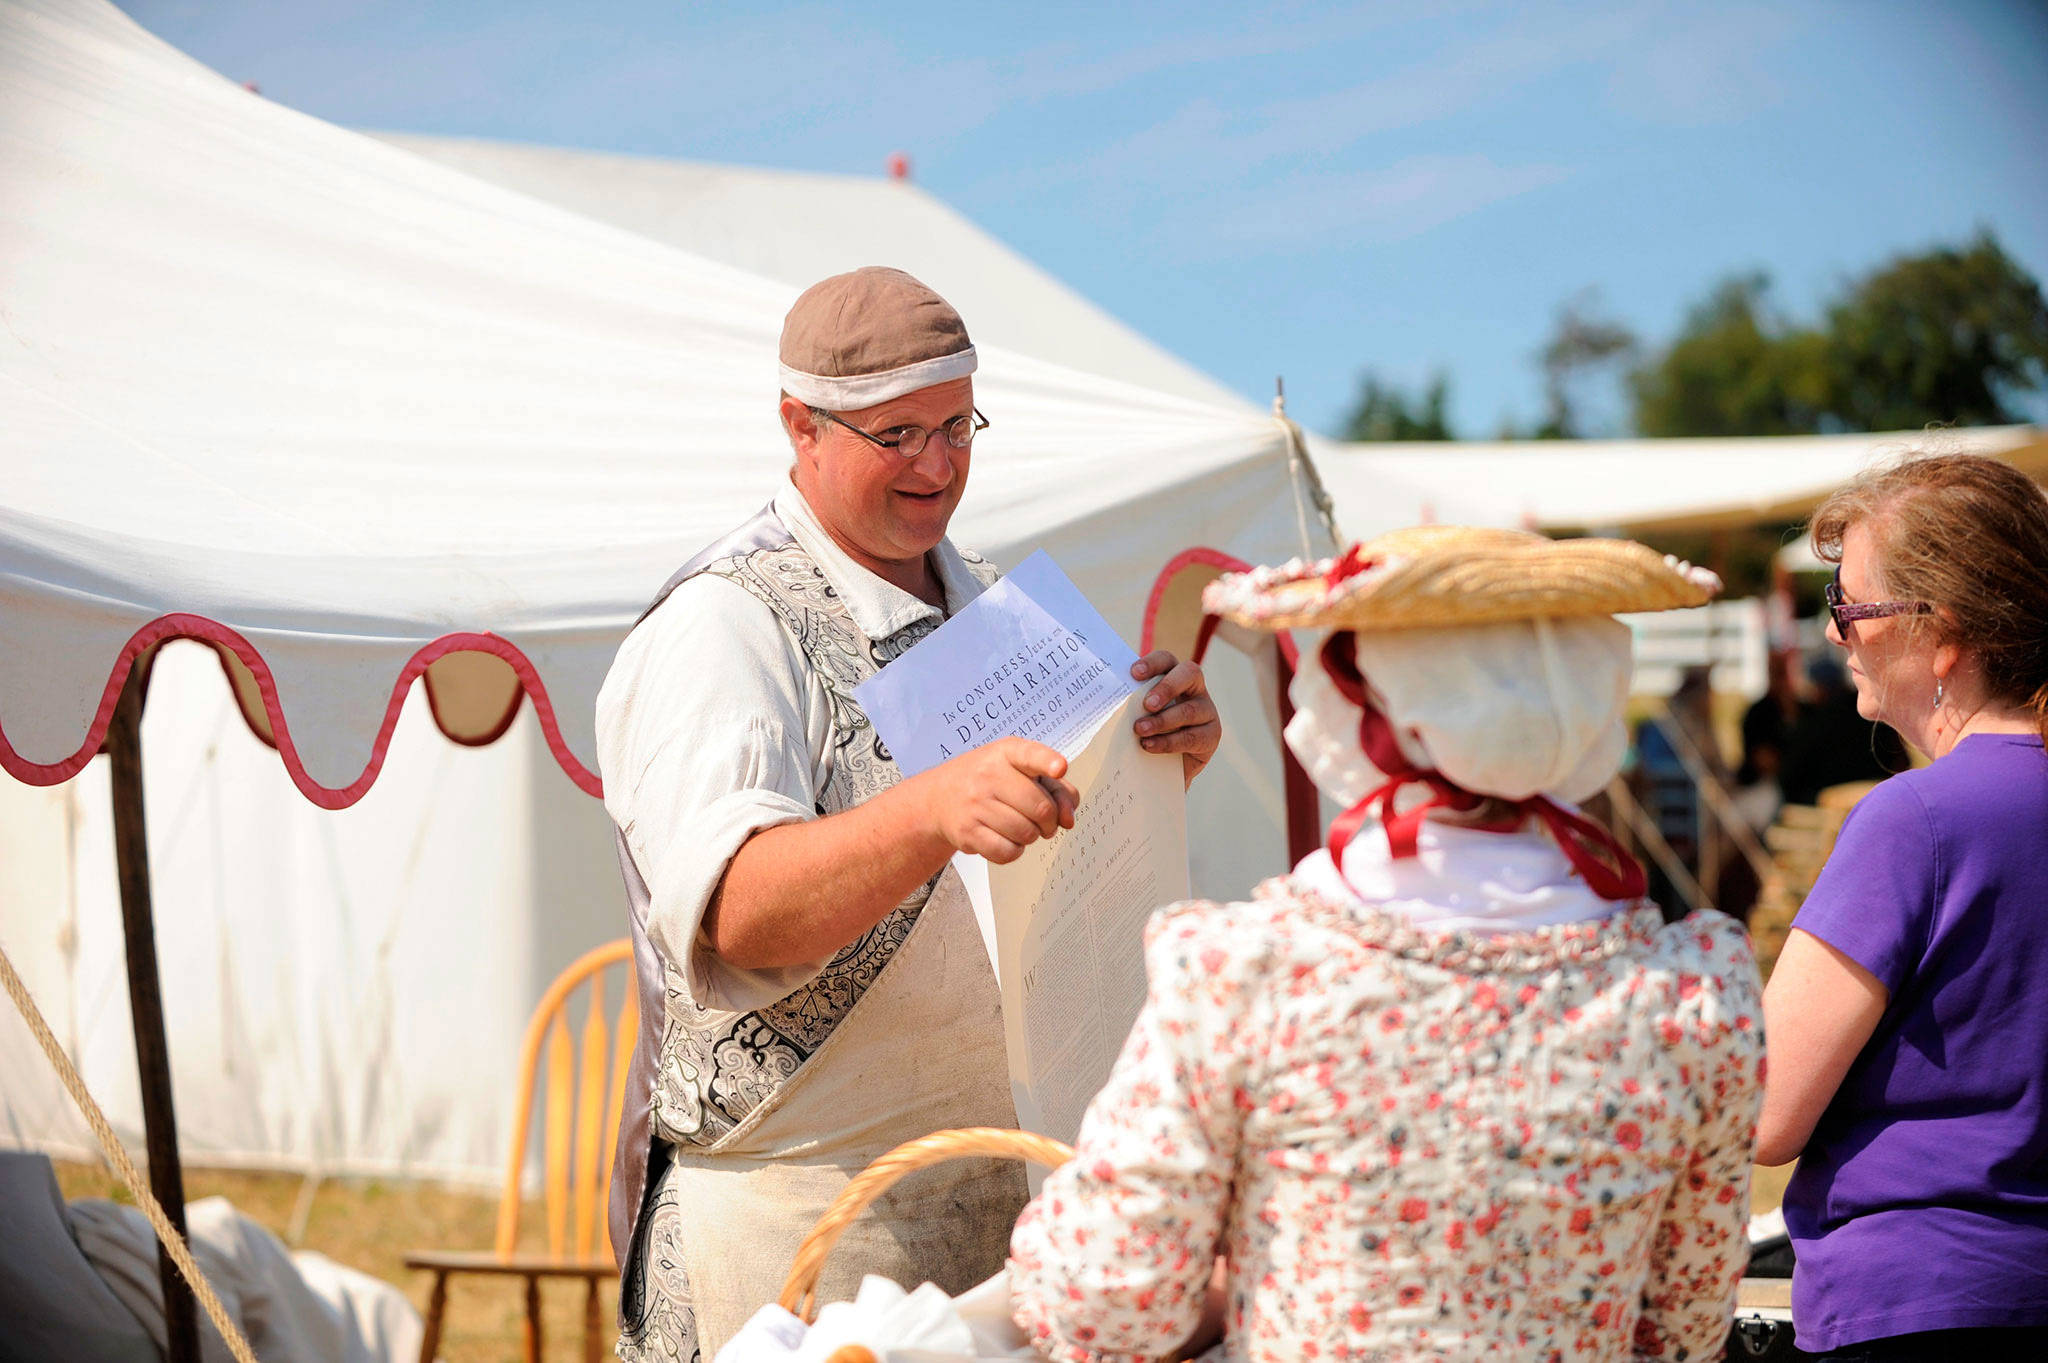 Gove Allen portrays publisher Isaiah Thomas at last year’s Northwest Colonial Festival, and he plans to return Aug. 9-12 this year with his printing press. Sequim Gazette file photo by Matthew Nash